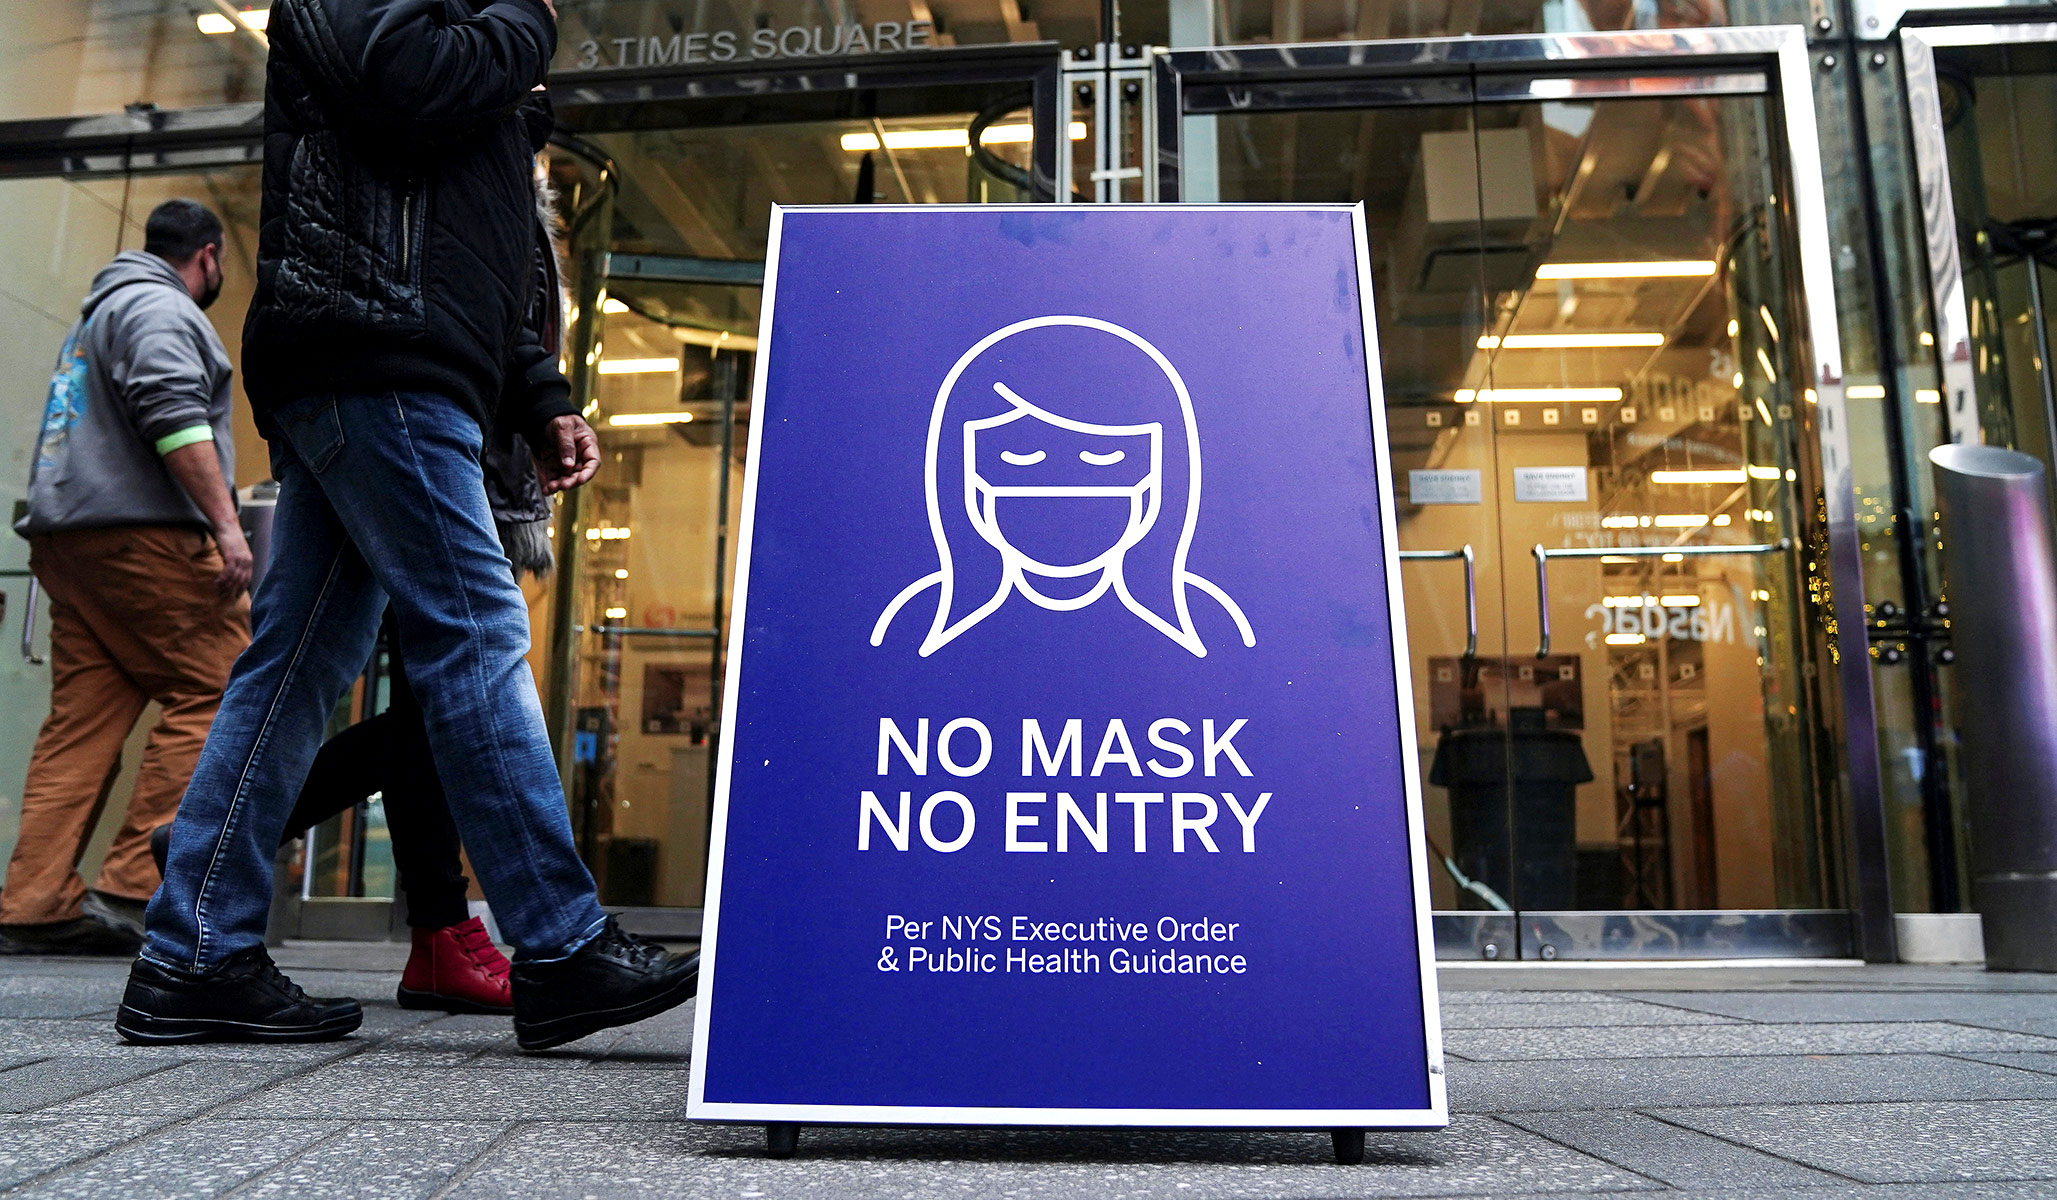 New York Appeals Court Grants Stay, Allowing State to Reinstate Mask Mandate